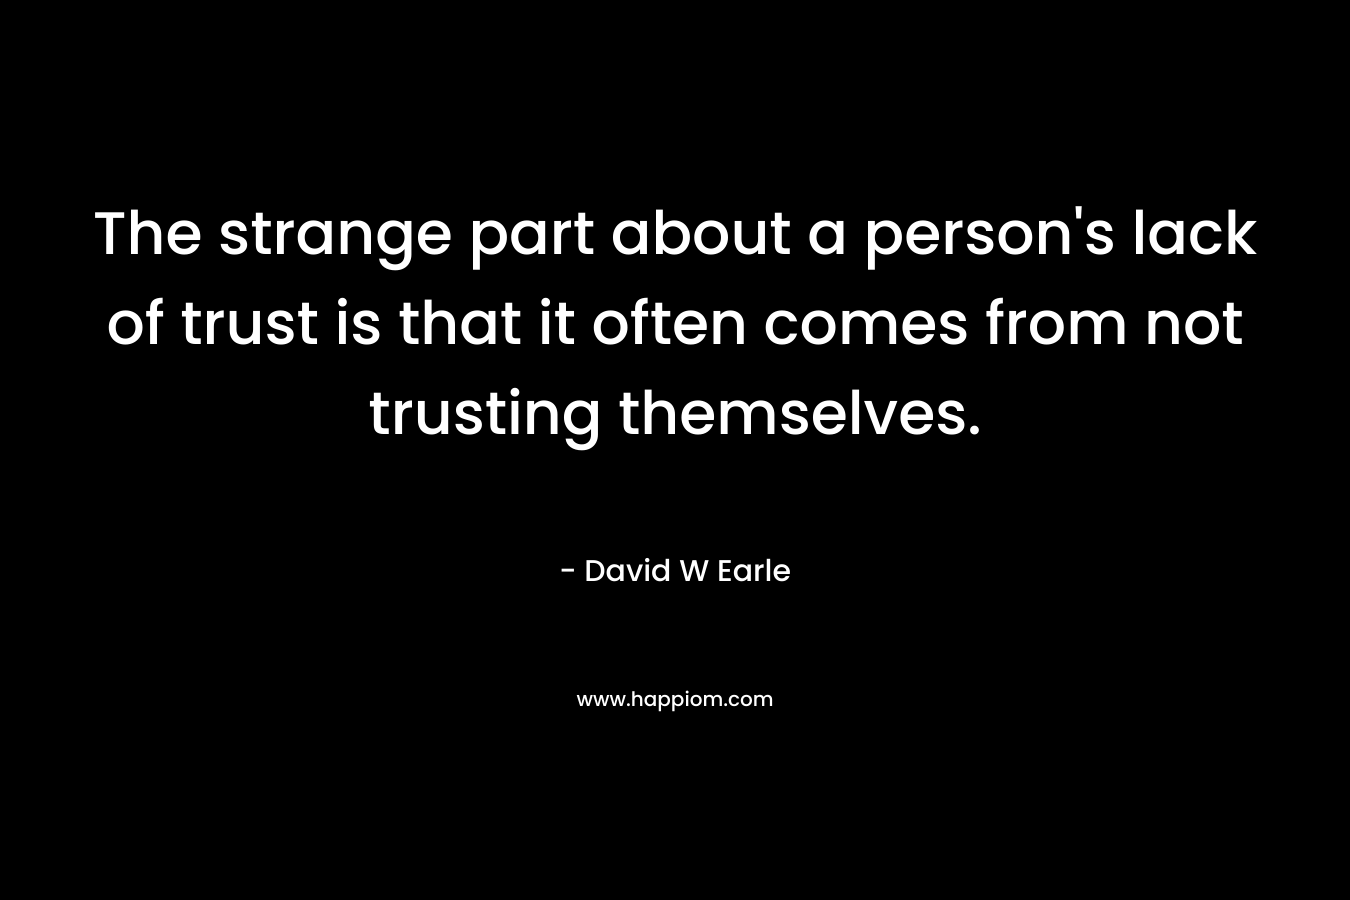 The strange part about a person's lack of trust is that it often comes from not trusting themselves.